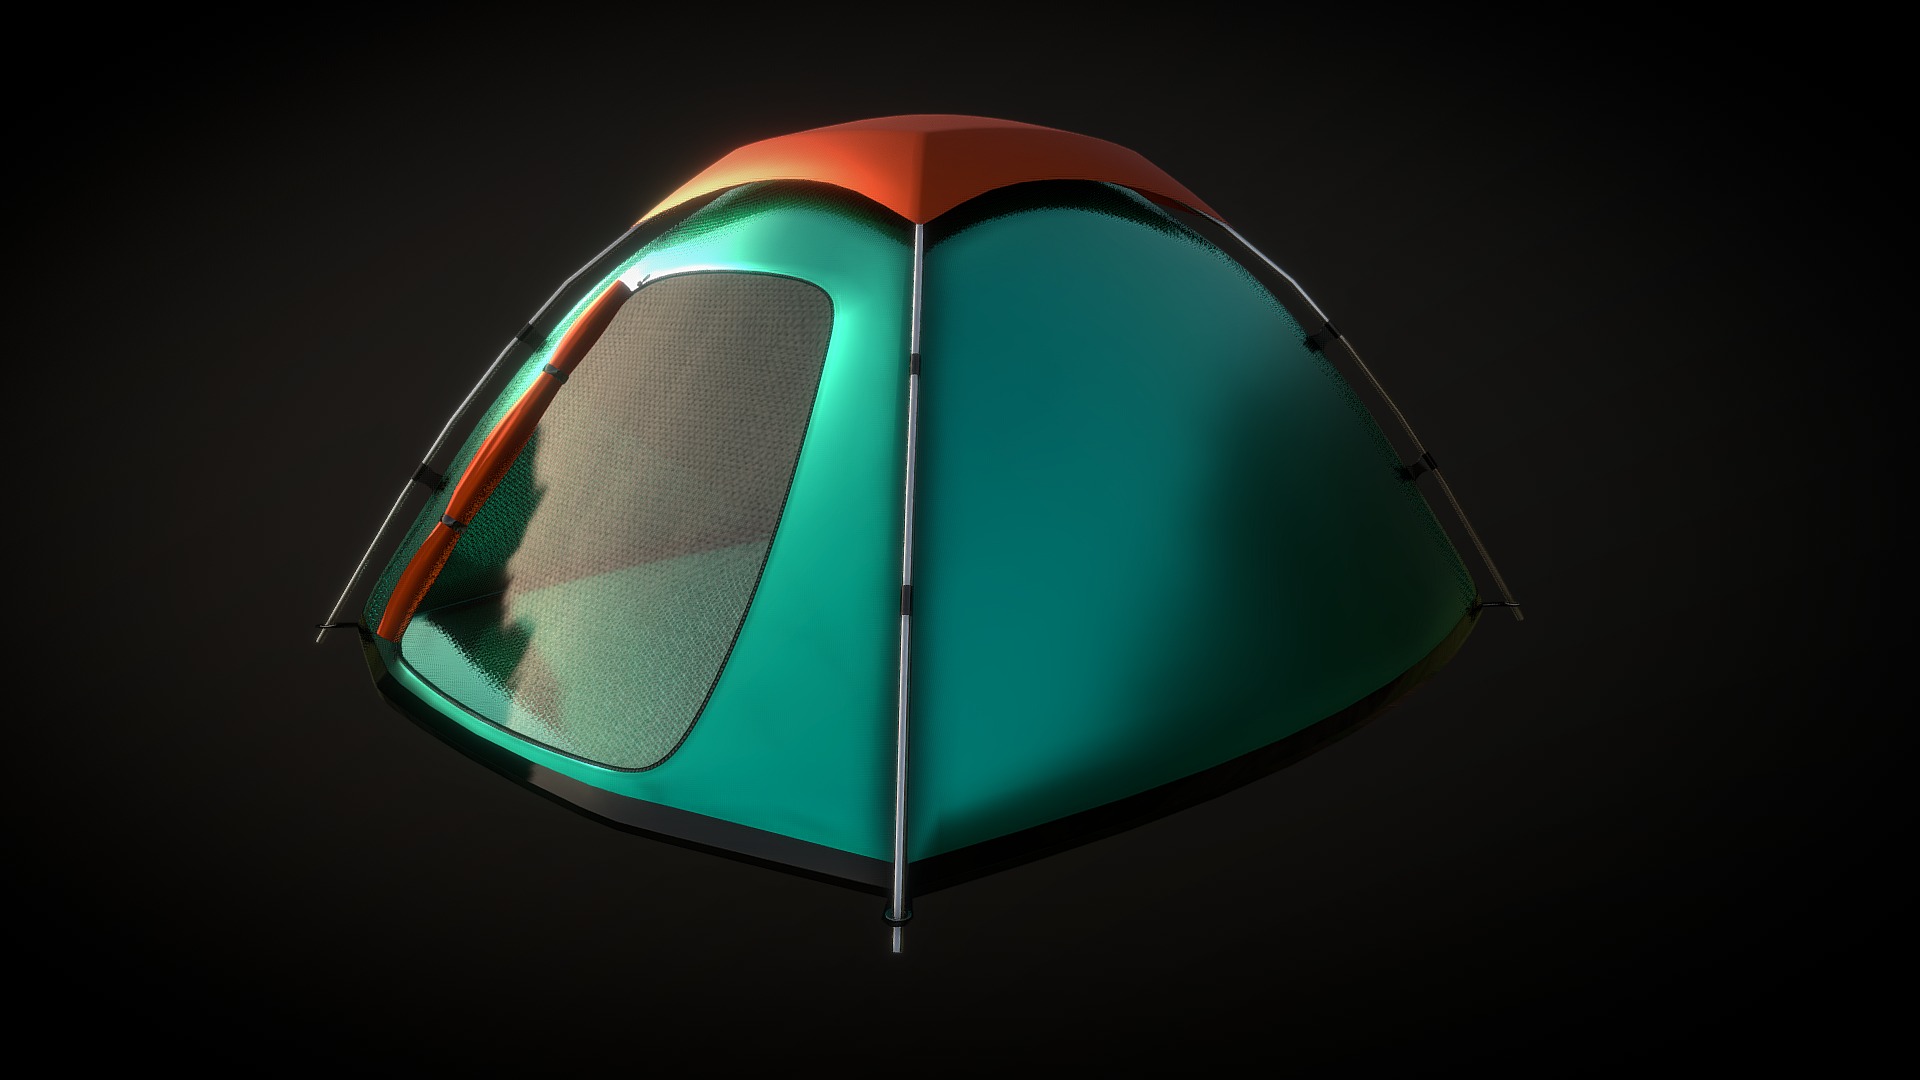 3D model Tourist Tent - This is a 3D model of the Tourist Tent. The 3D model is about a logo with a green and red circle in the middle.